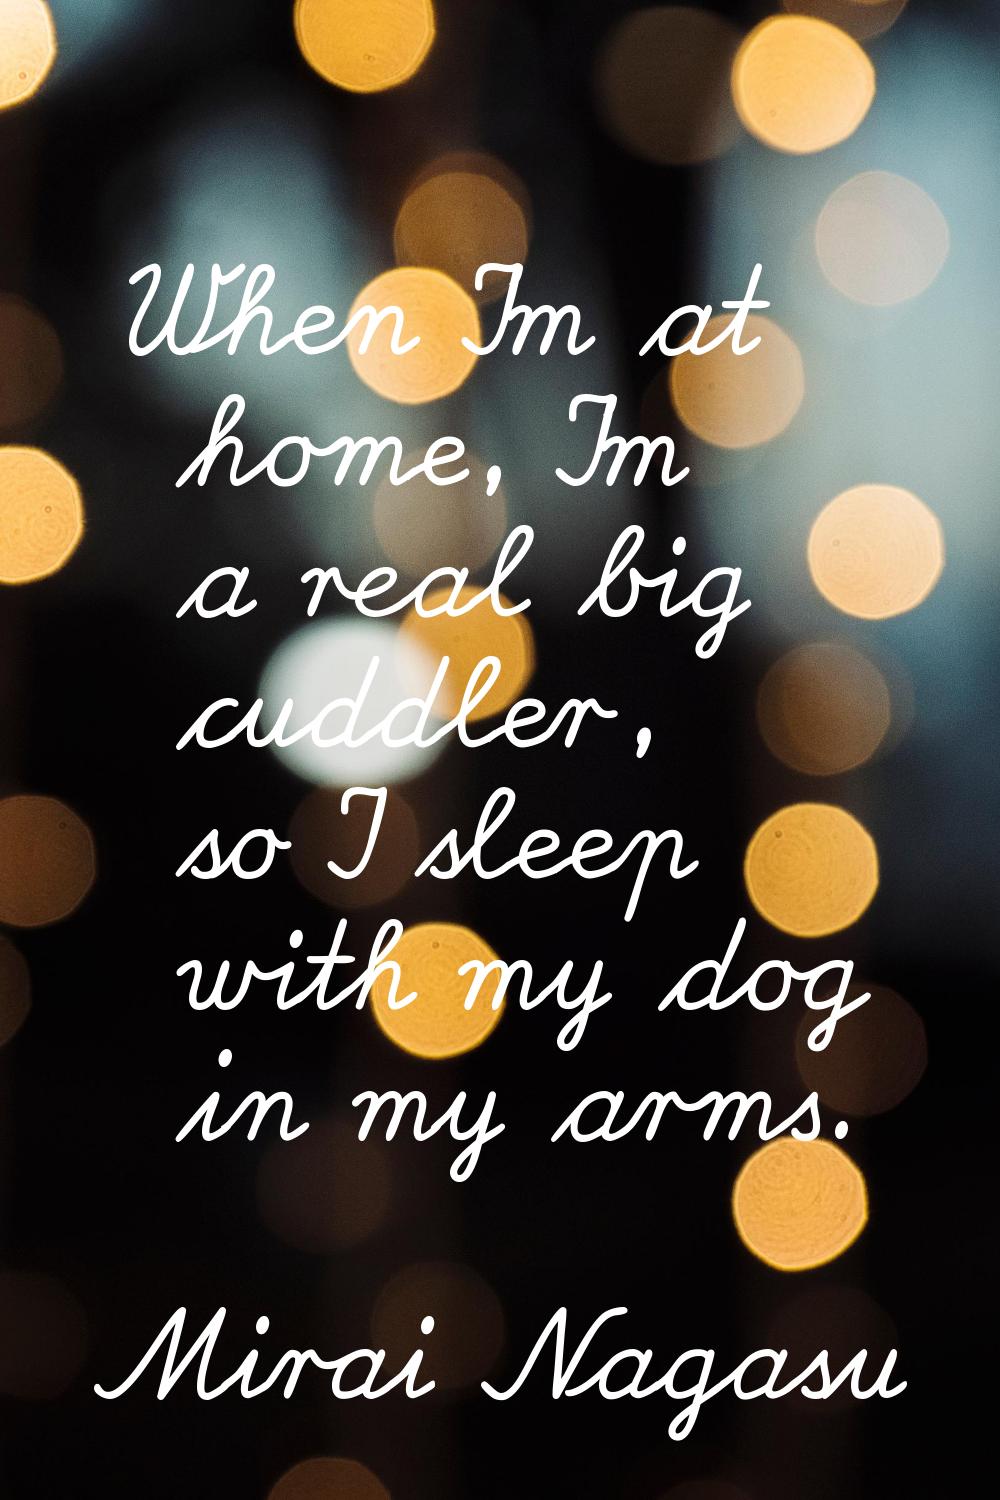 When I'm at home, I'm a real big cuddler, so I sleep with my dog in my arms.